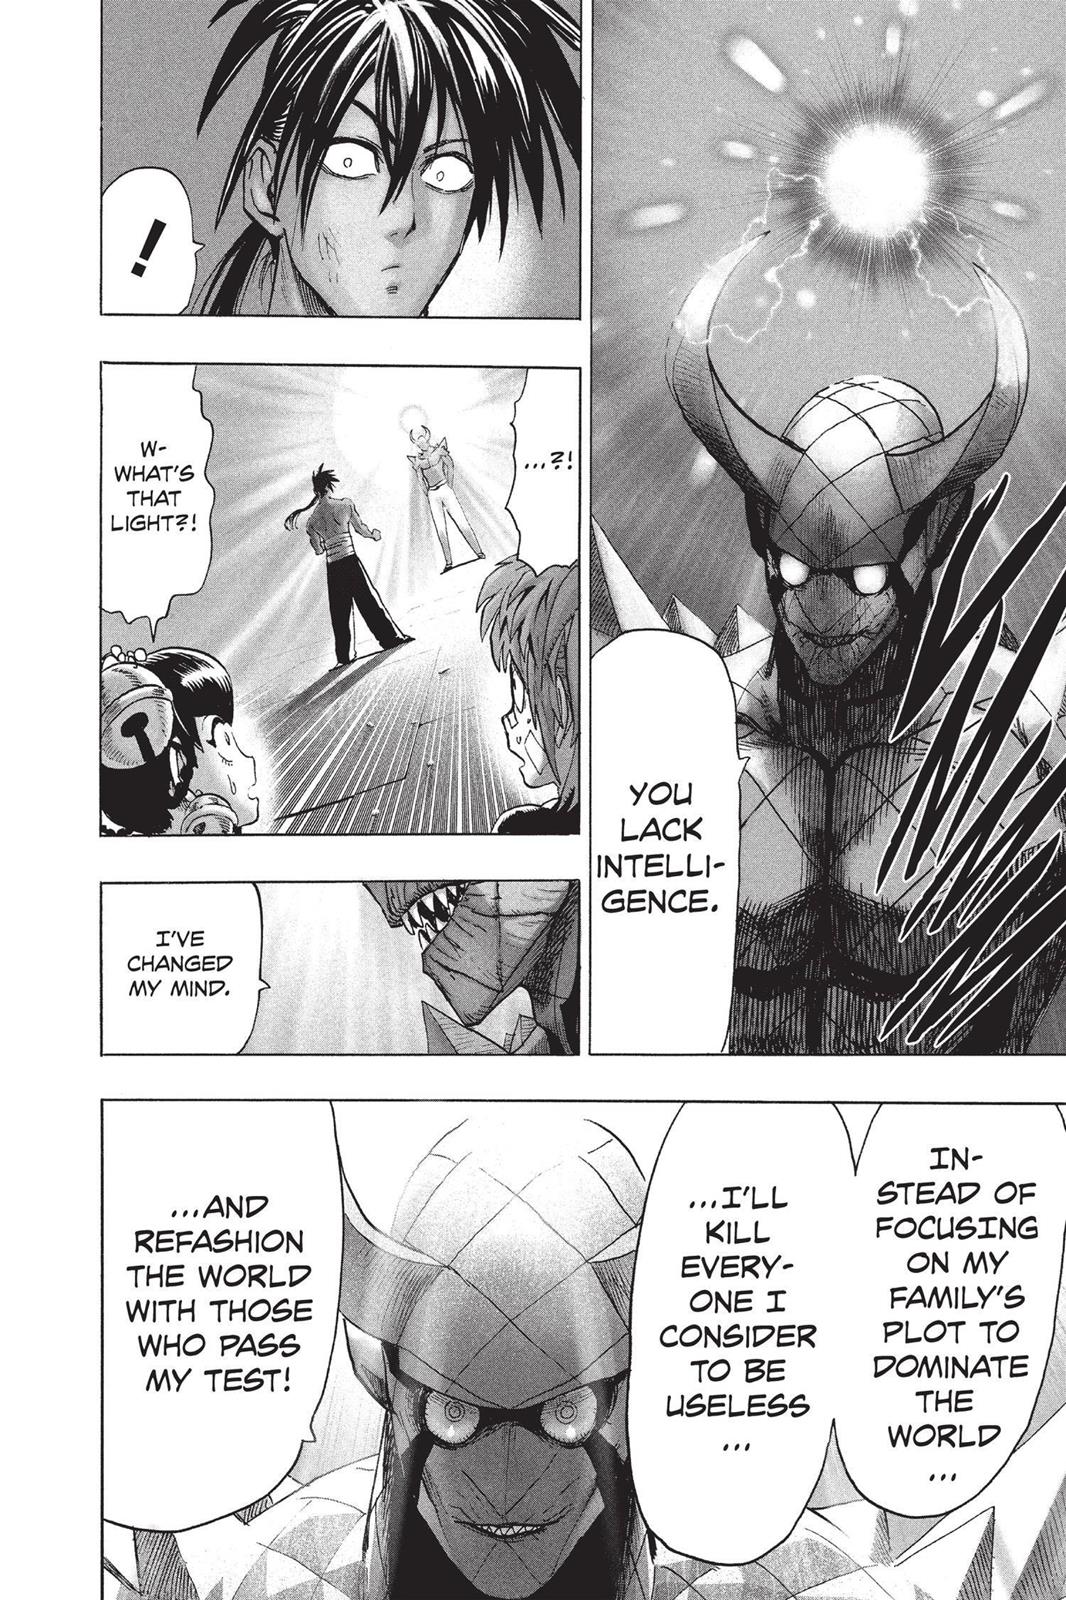 One-Punch Man, Punch 72 image 48